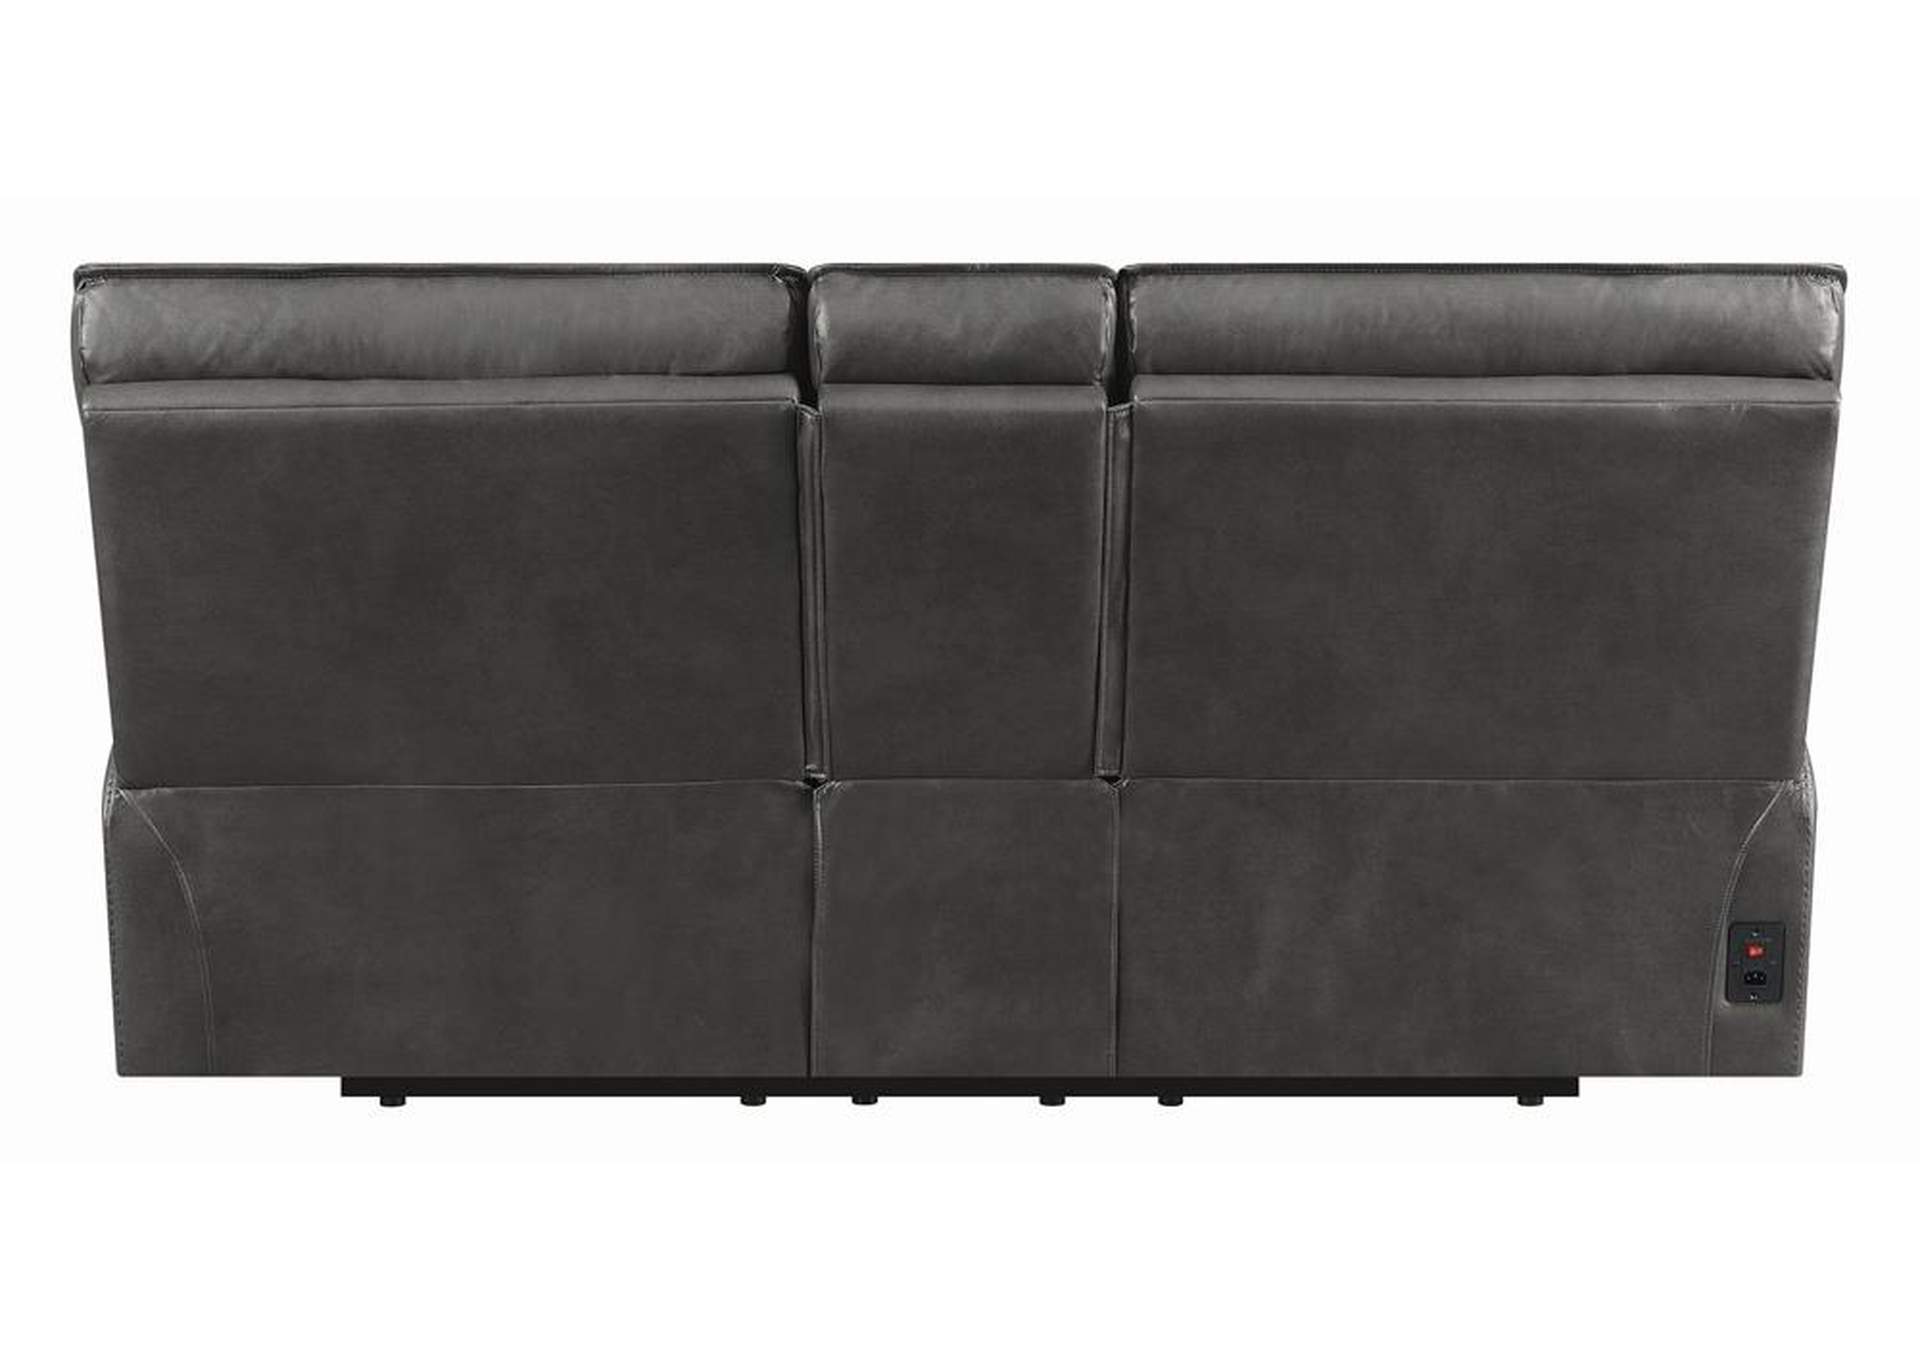 Standford Casual Charcoal Power Loveseat,Coaster Furniture